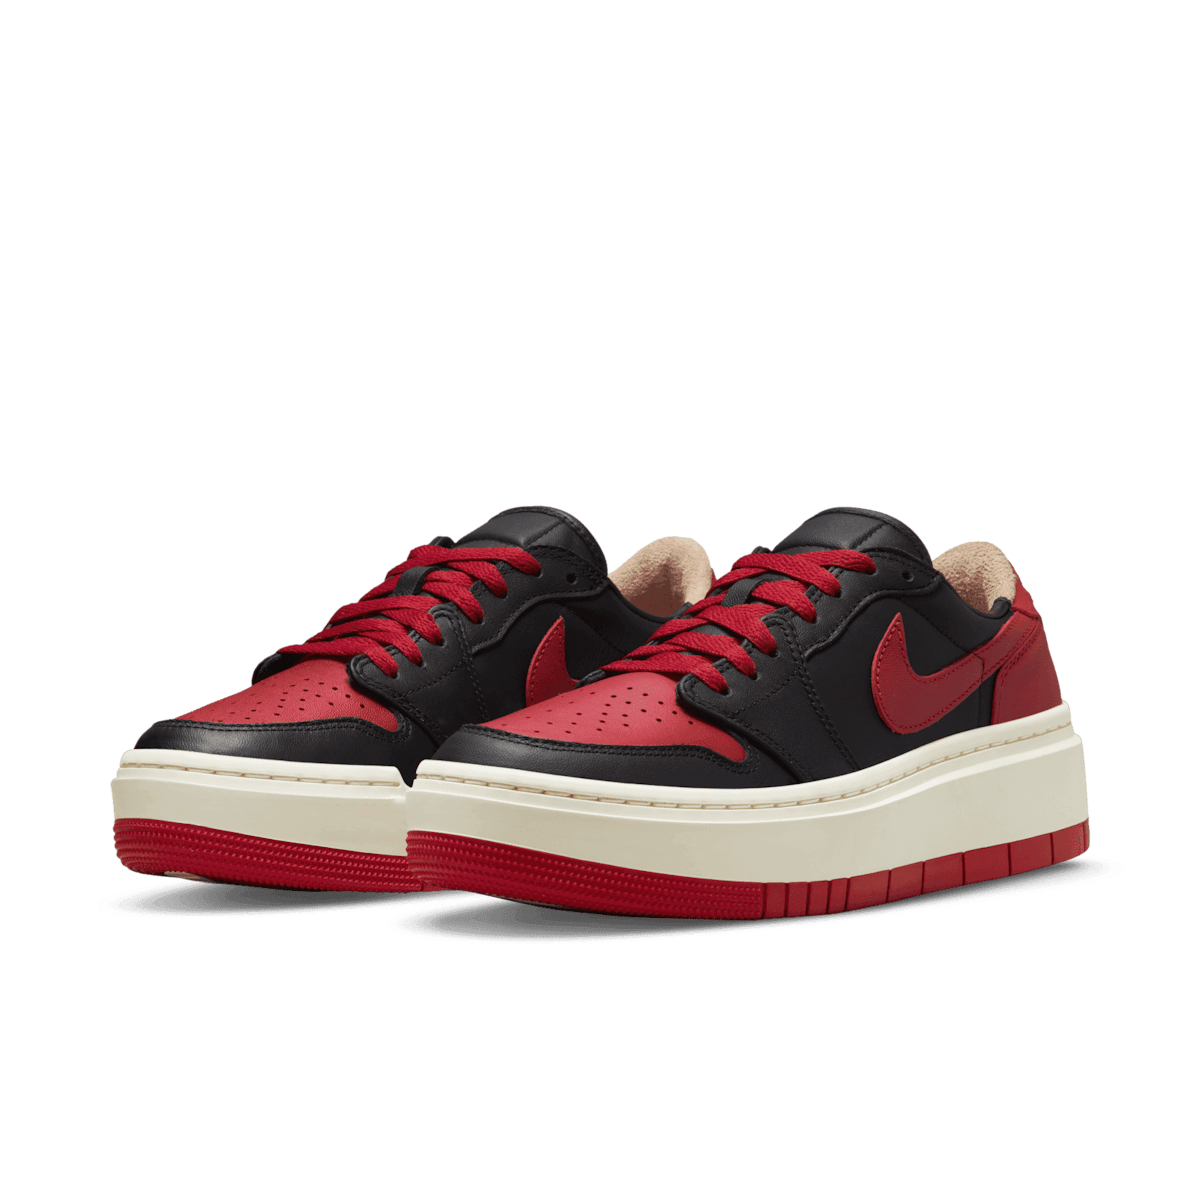 Jordan 1 Low LV8D Elevated Bred (W) Angle 1